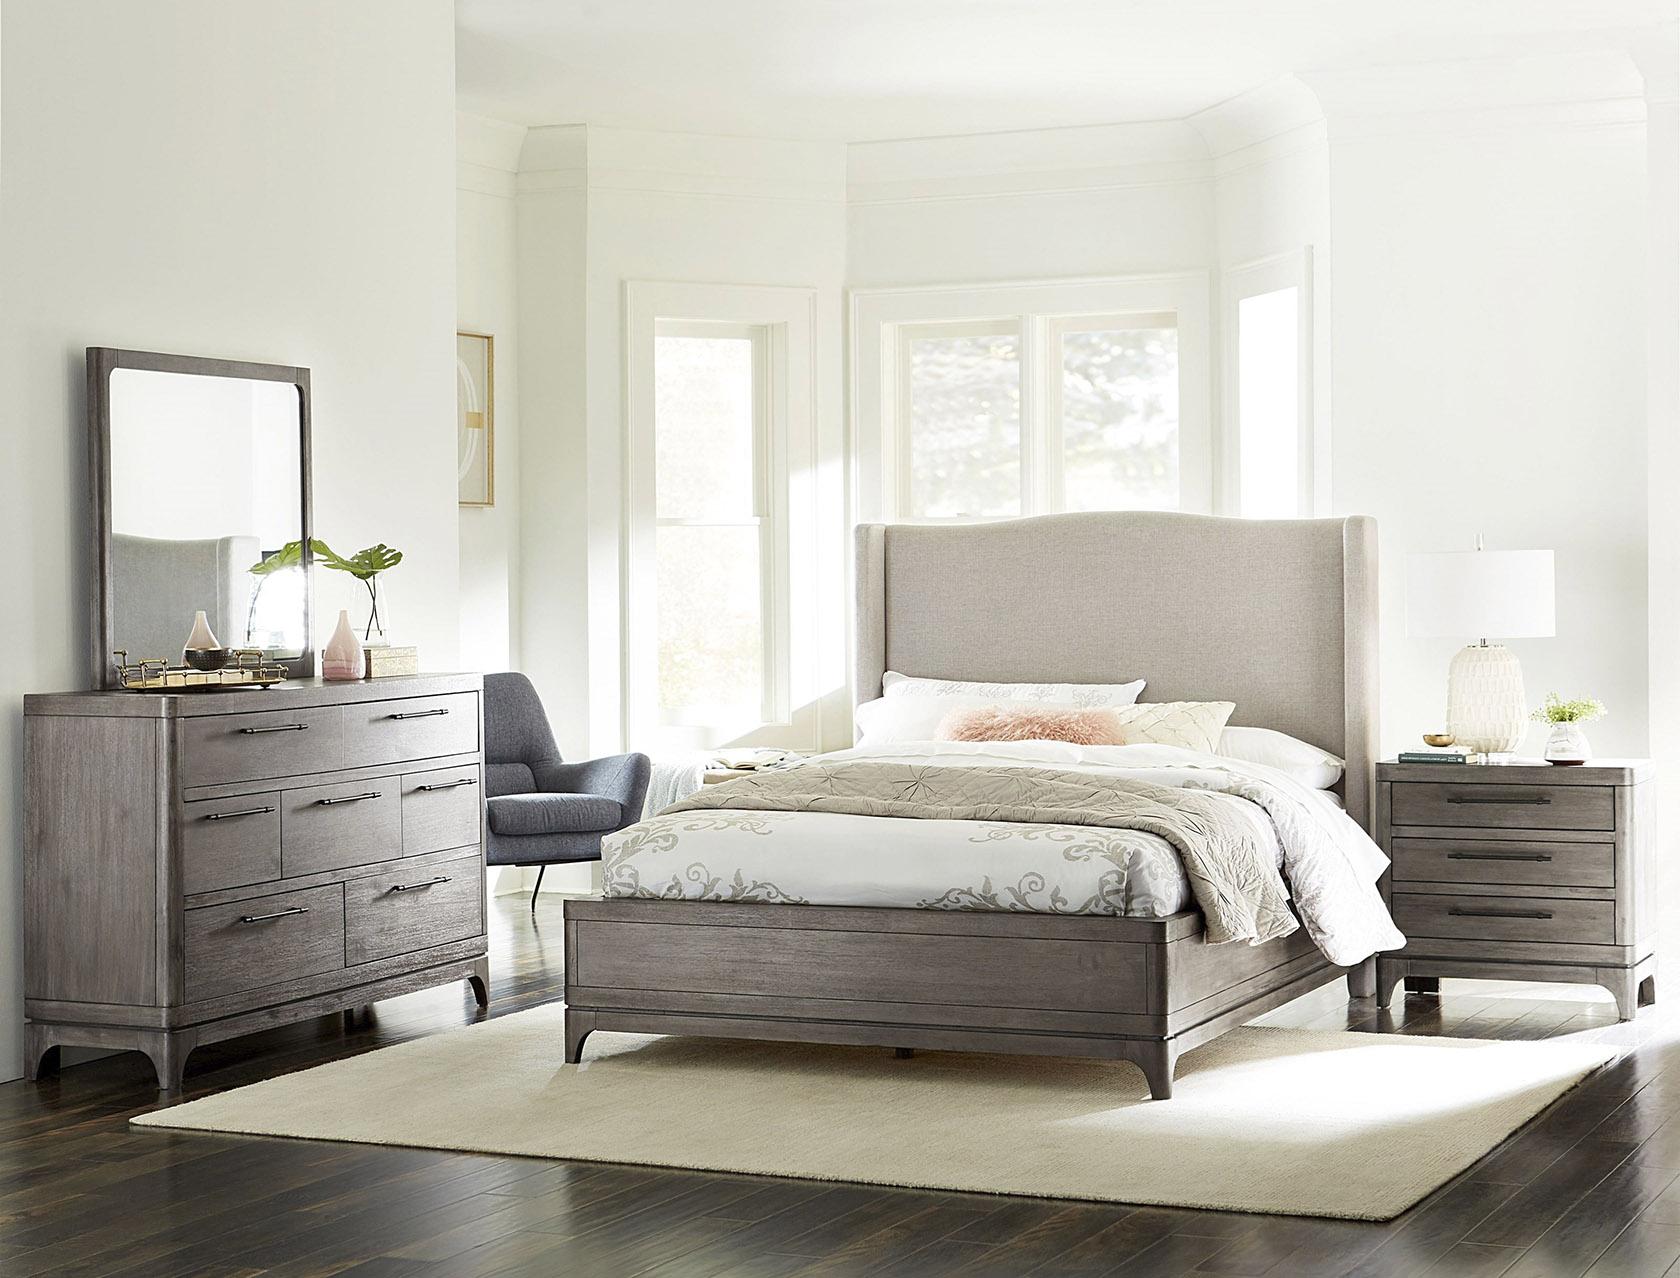 

    
Rustic Slate Gray Upholstered Queen Bedroom Set 4Pcs CICERO by Modus Furniture
